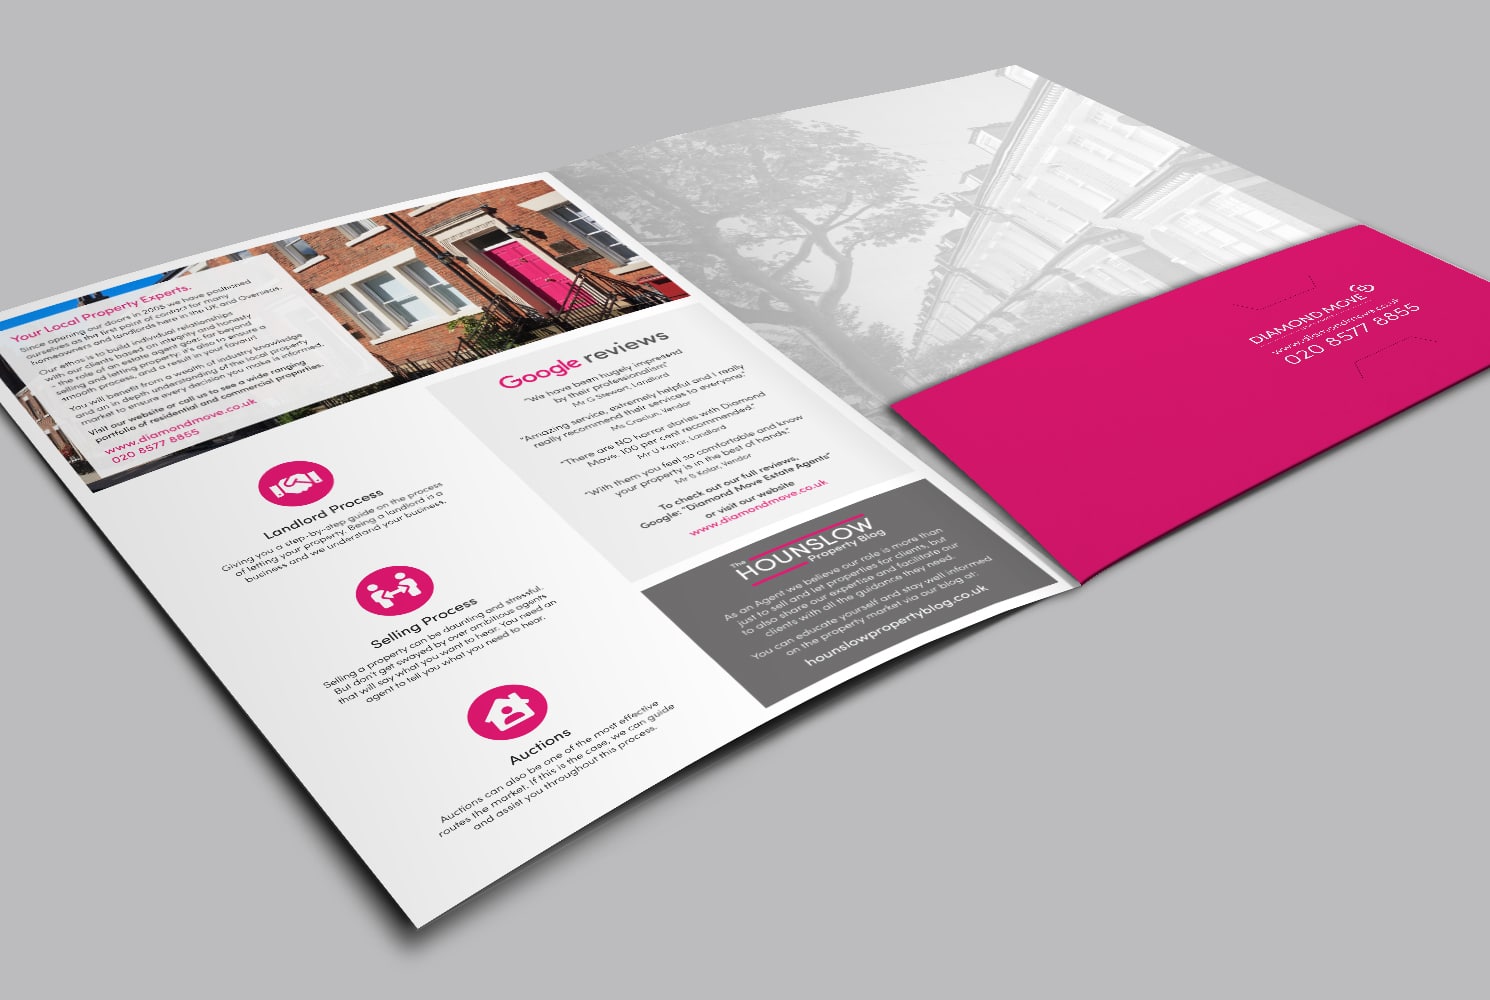 Mock up of a folder for Diamond Move Estate Agents showing the the inner pages and the pocket on the inside back cover